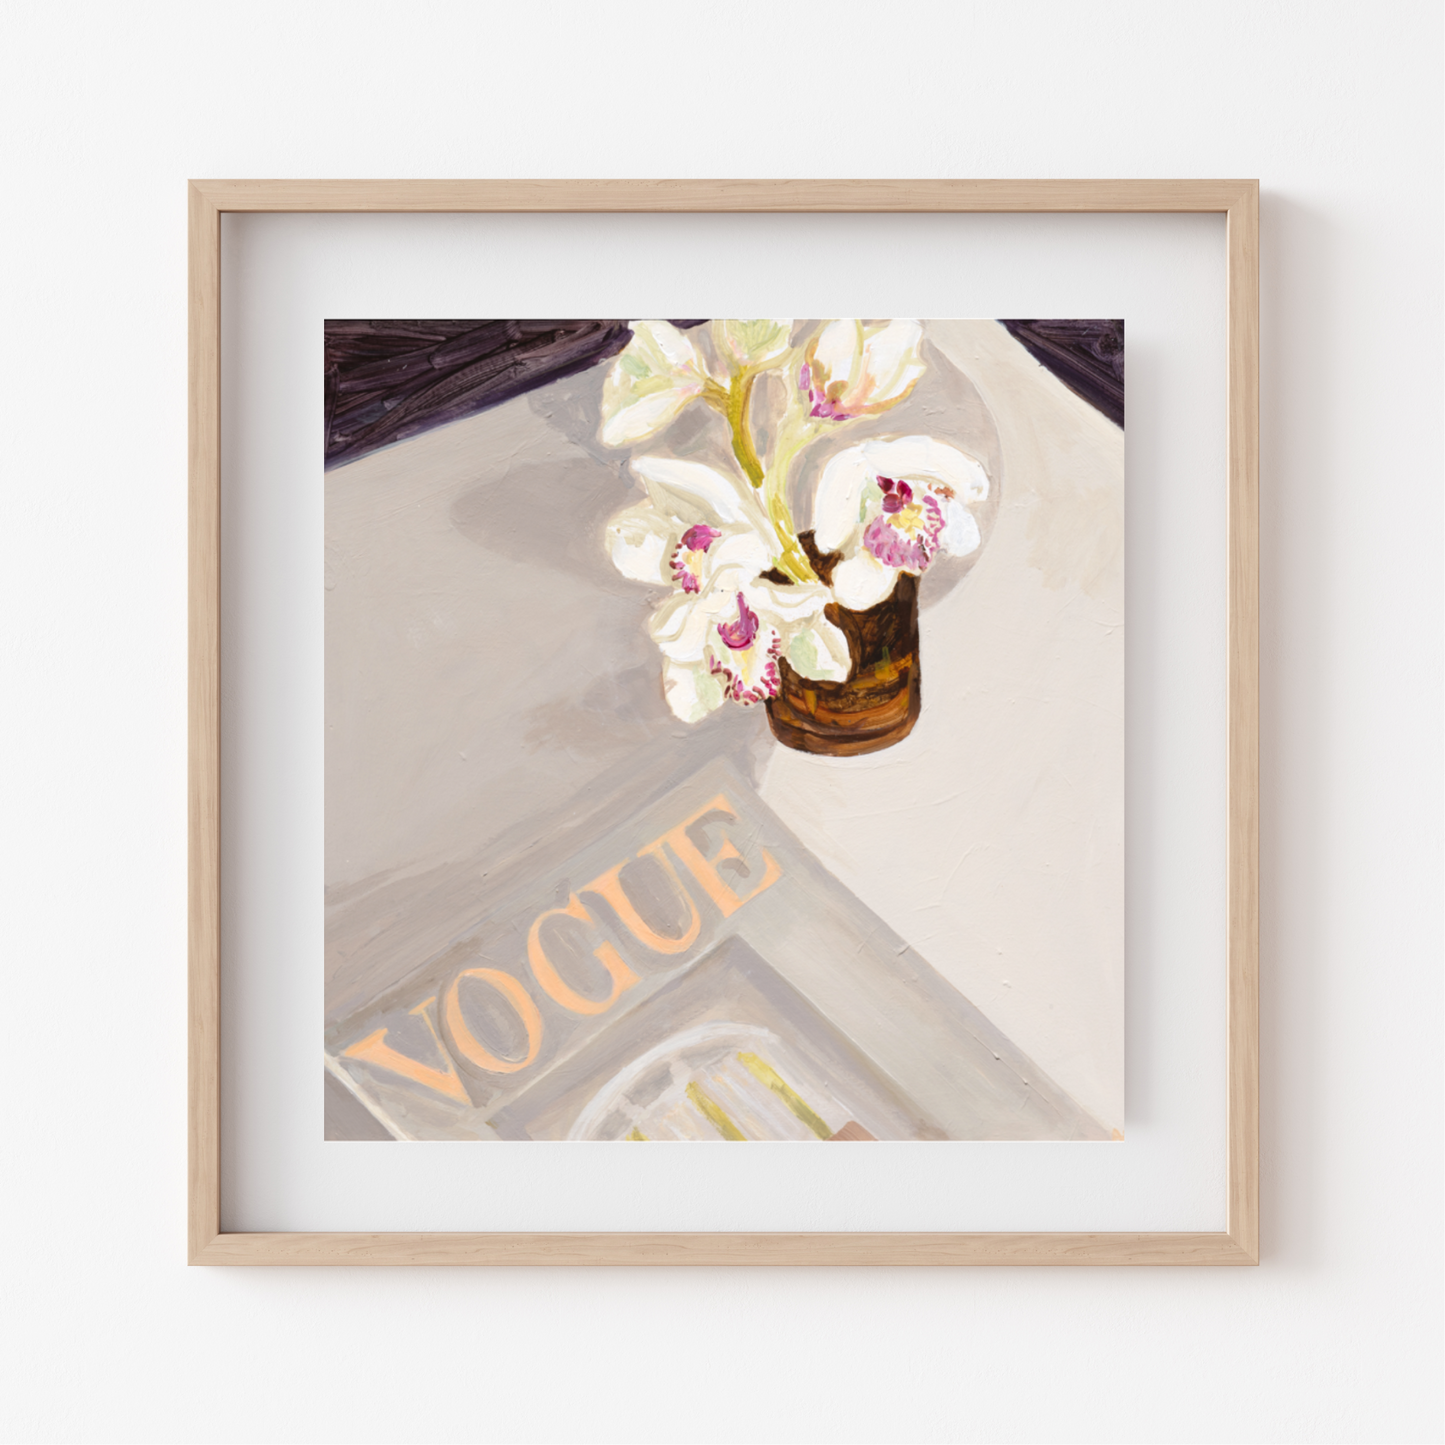 'Vogue & Orchids' Limited Edition Print